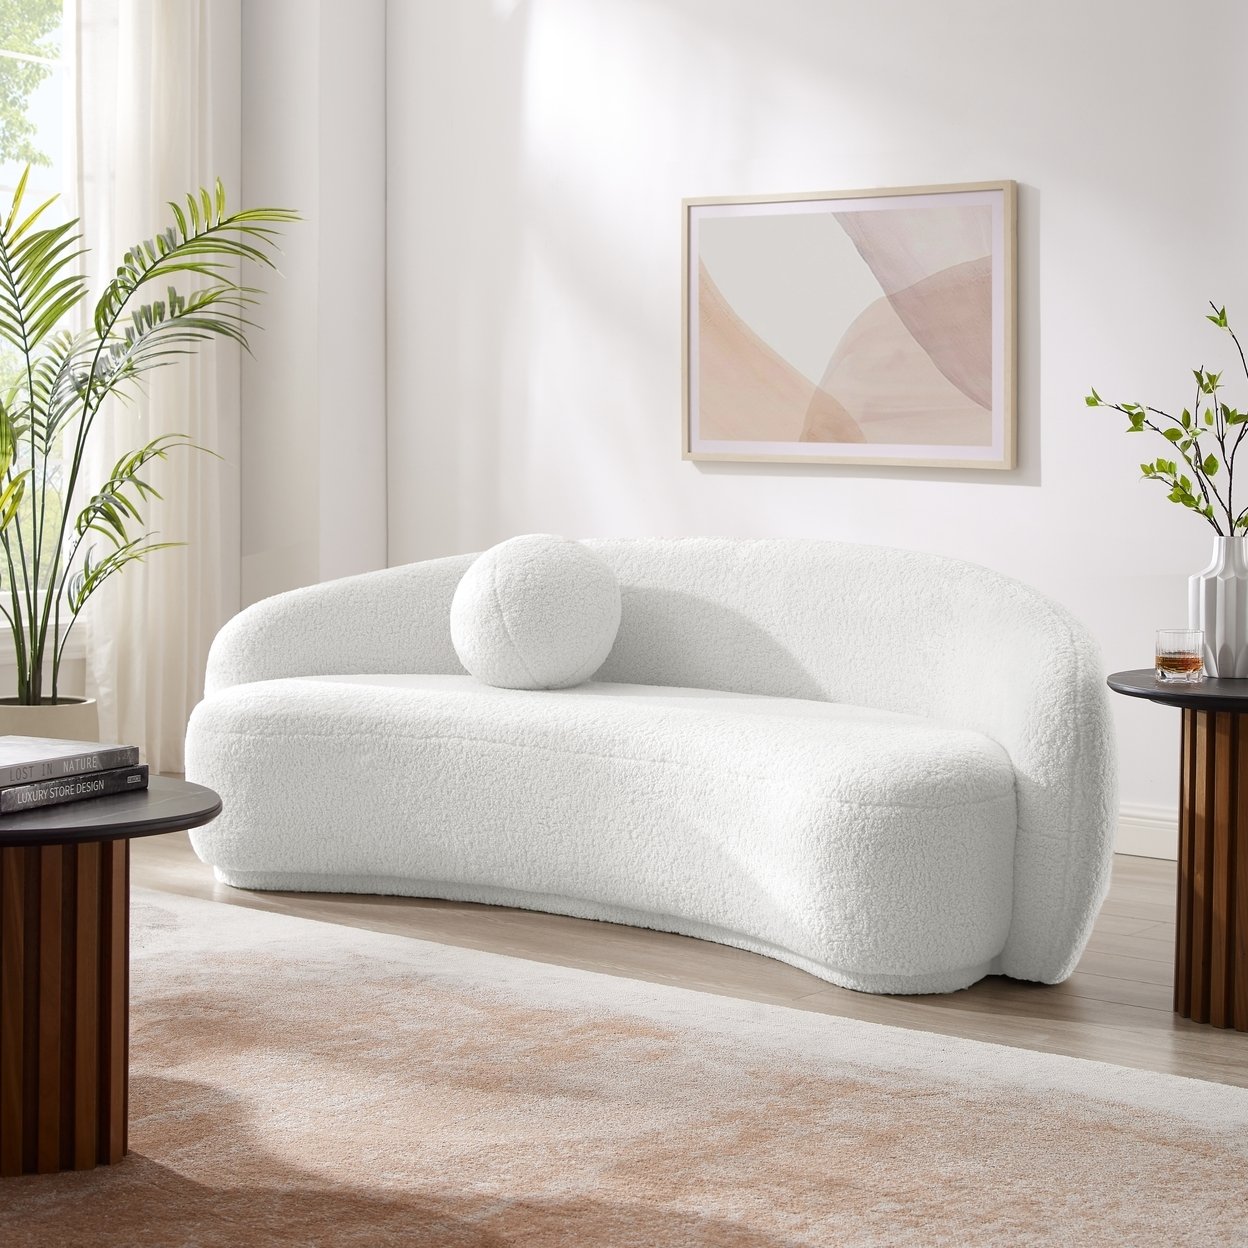 Coralyn Sofa - Upholstered, Rounded Design With Sloped Sweeping Arms,cloud-like Look, Accent Pillow Ball - White